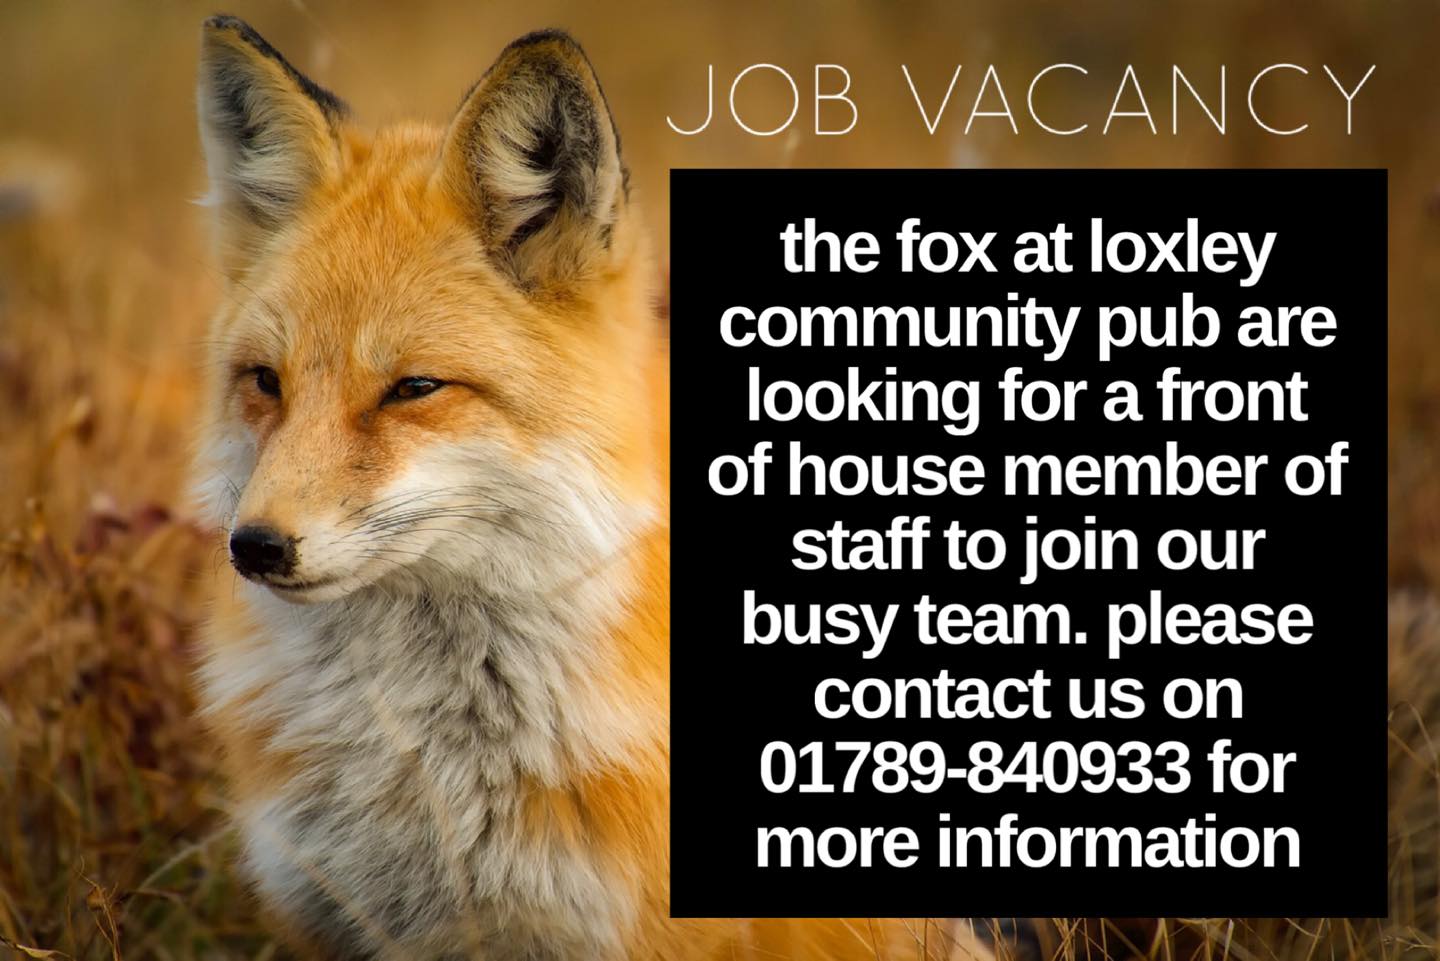 The Fox at Loxley